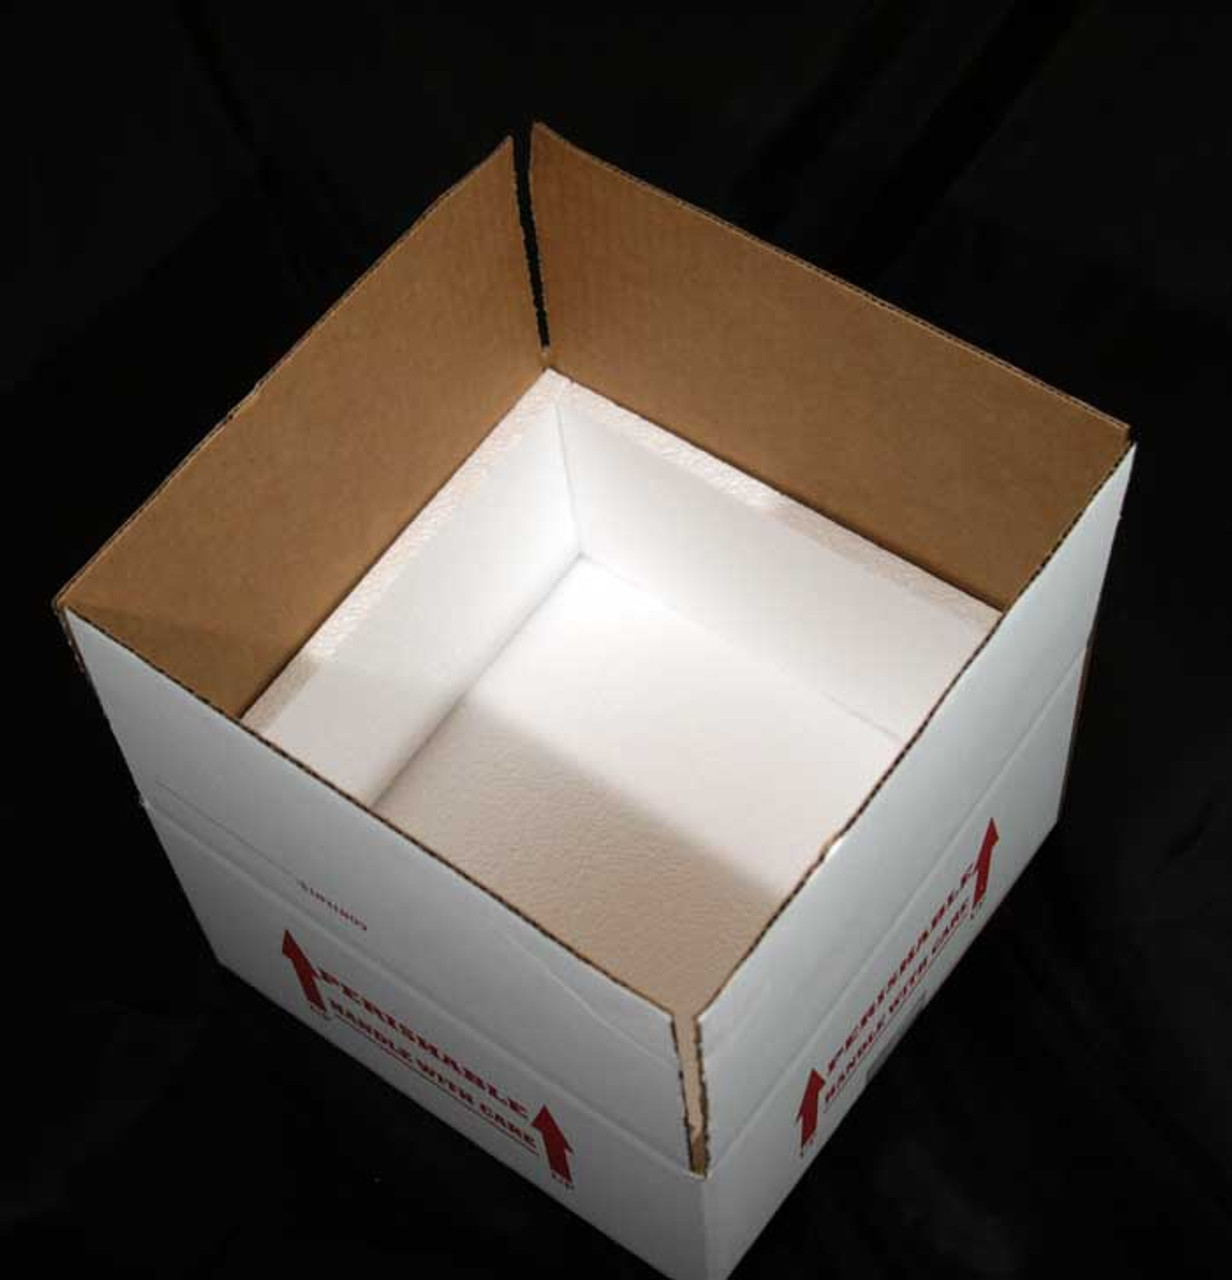 11x11x6 Insulated Shipping Box with 1/2" Foam 8 Pack